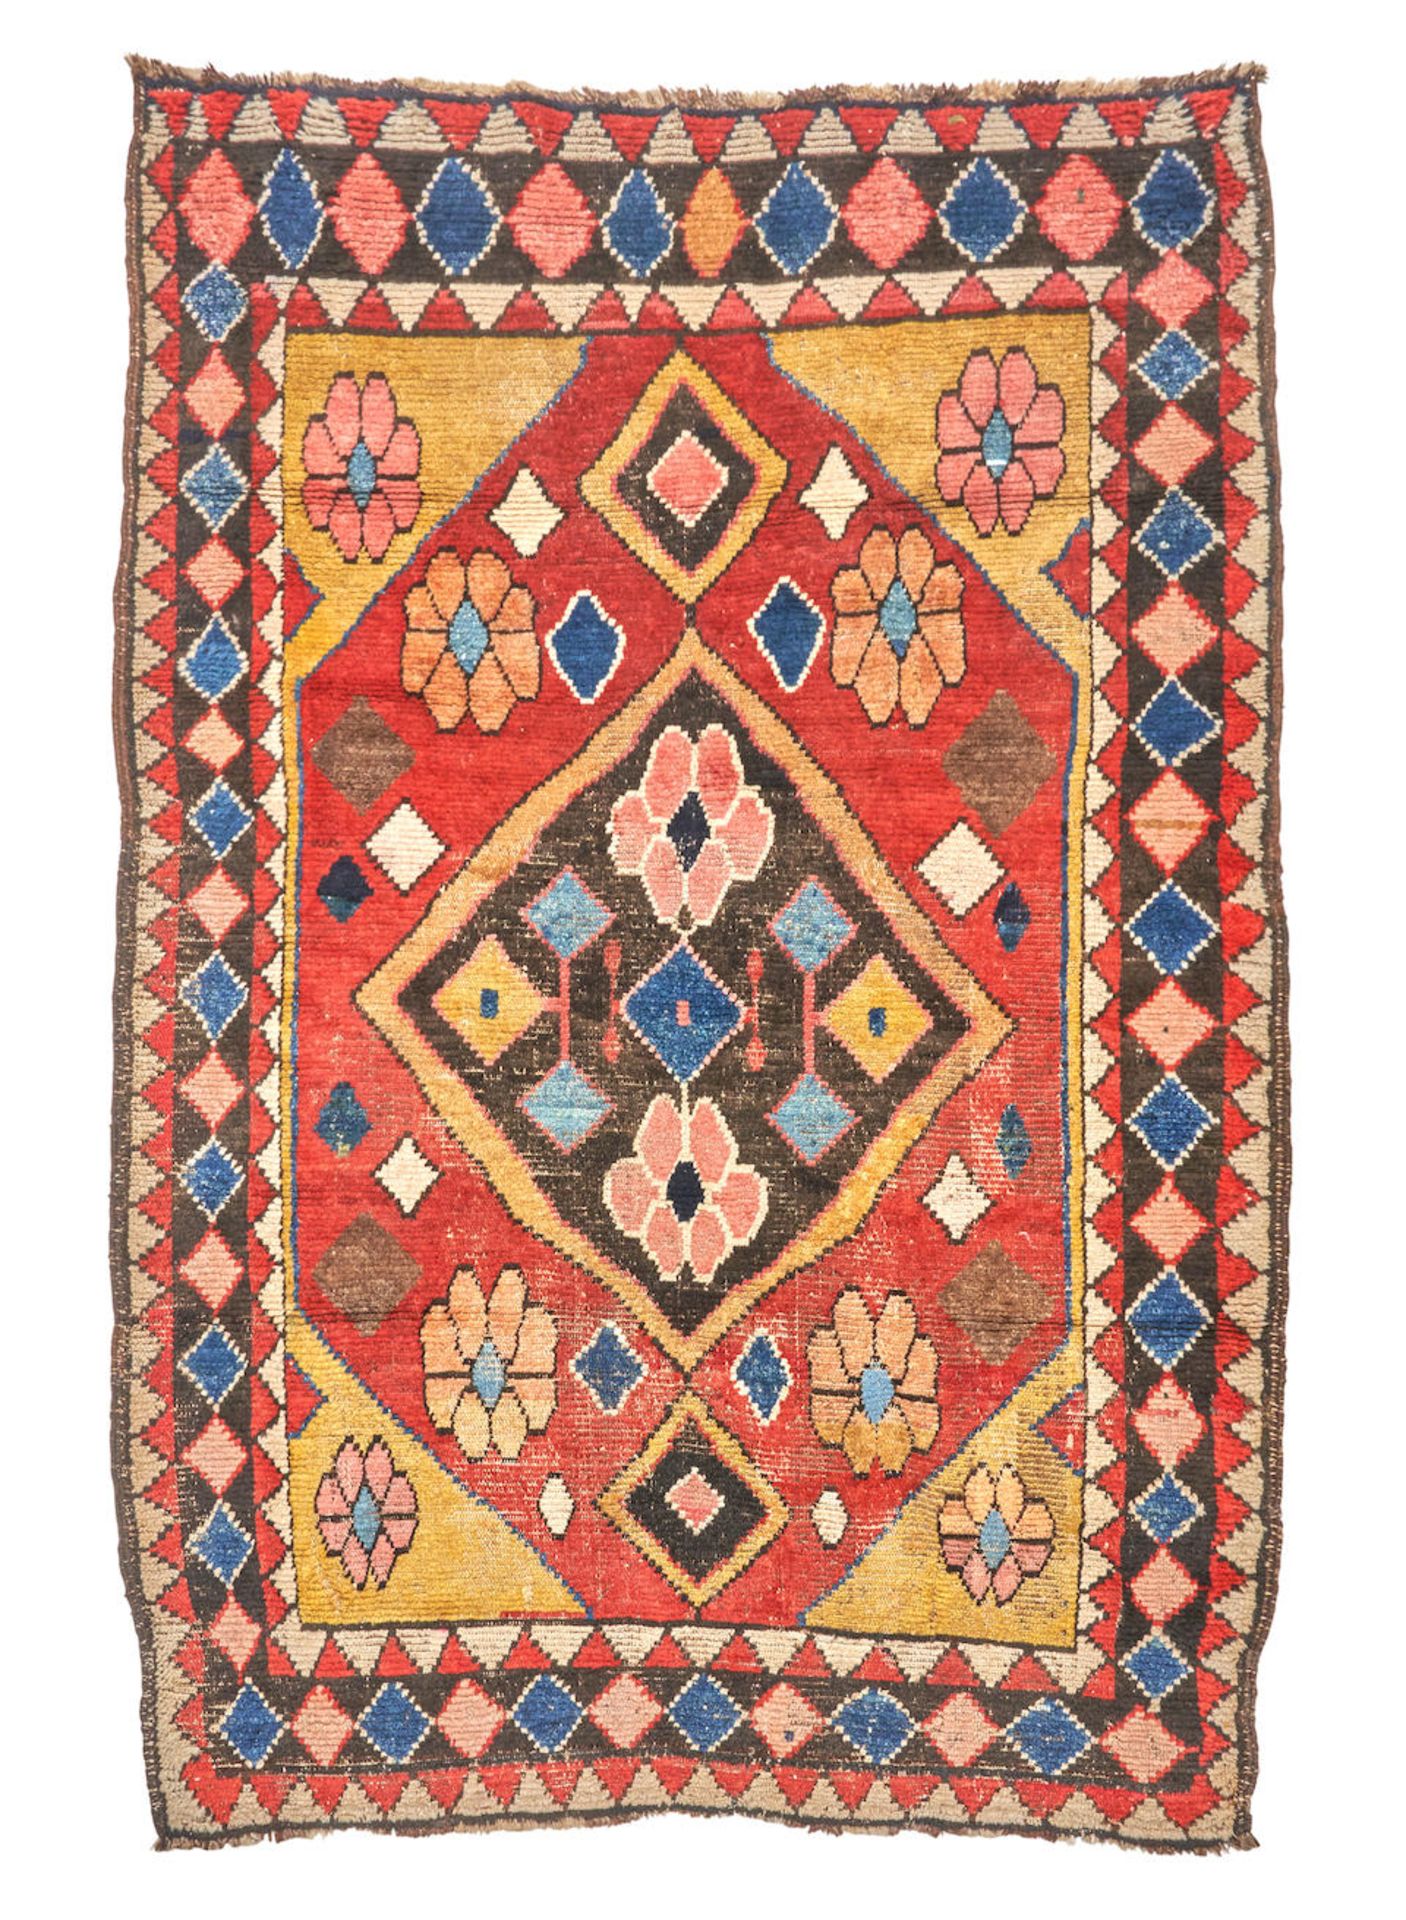 West Persian Gabbeh Rug Iran 4 ft. 7 in. x 7 ft.